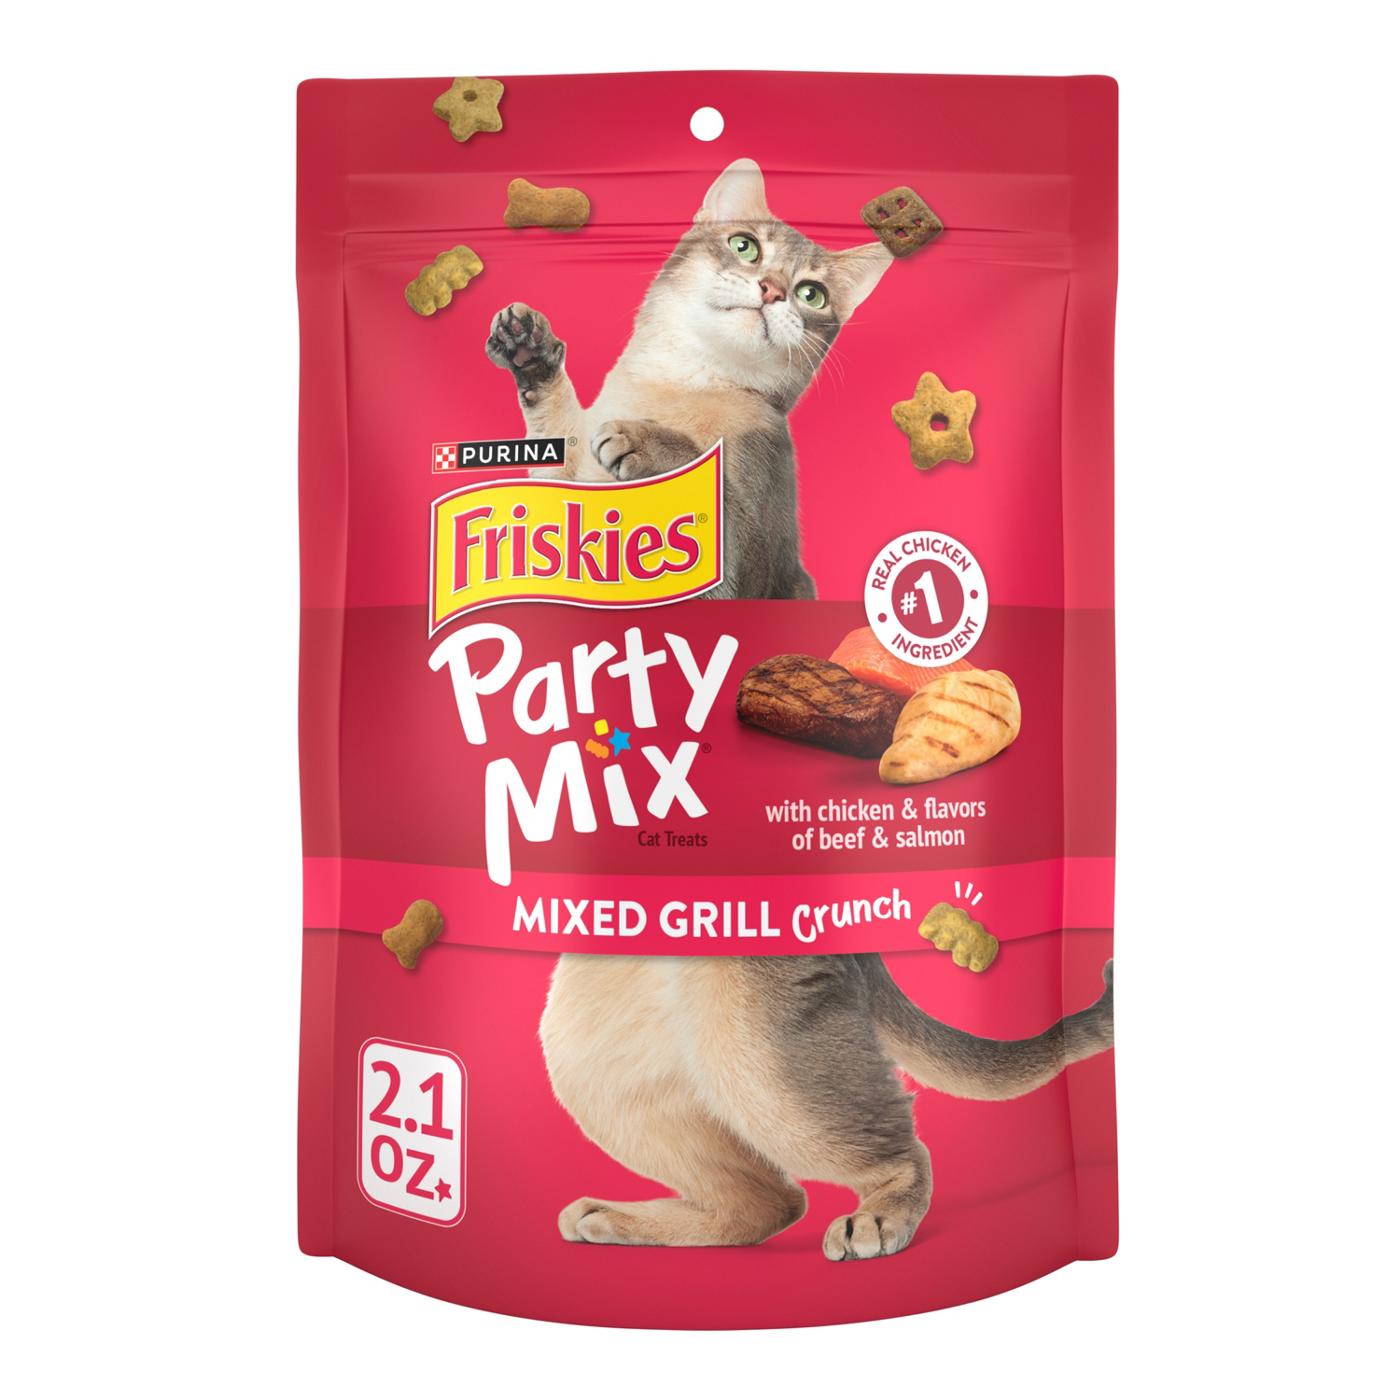 Friskies Purina Friskies Made in USA Facilities Cat Treats, Party Mix Mixed Grill Crunch; image 1 of 9